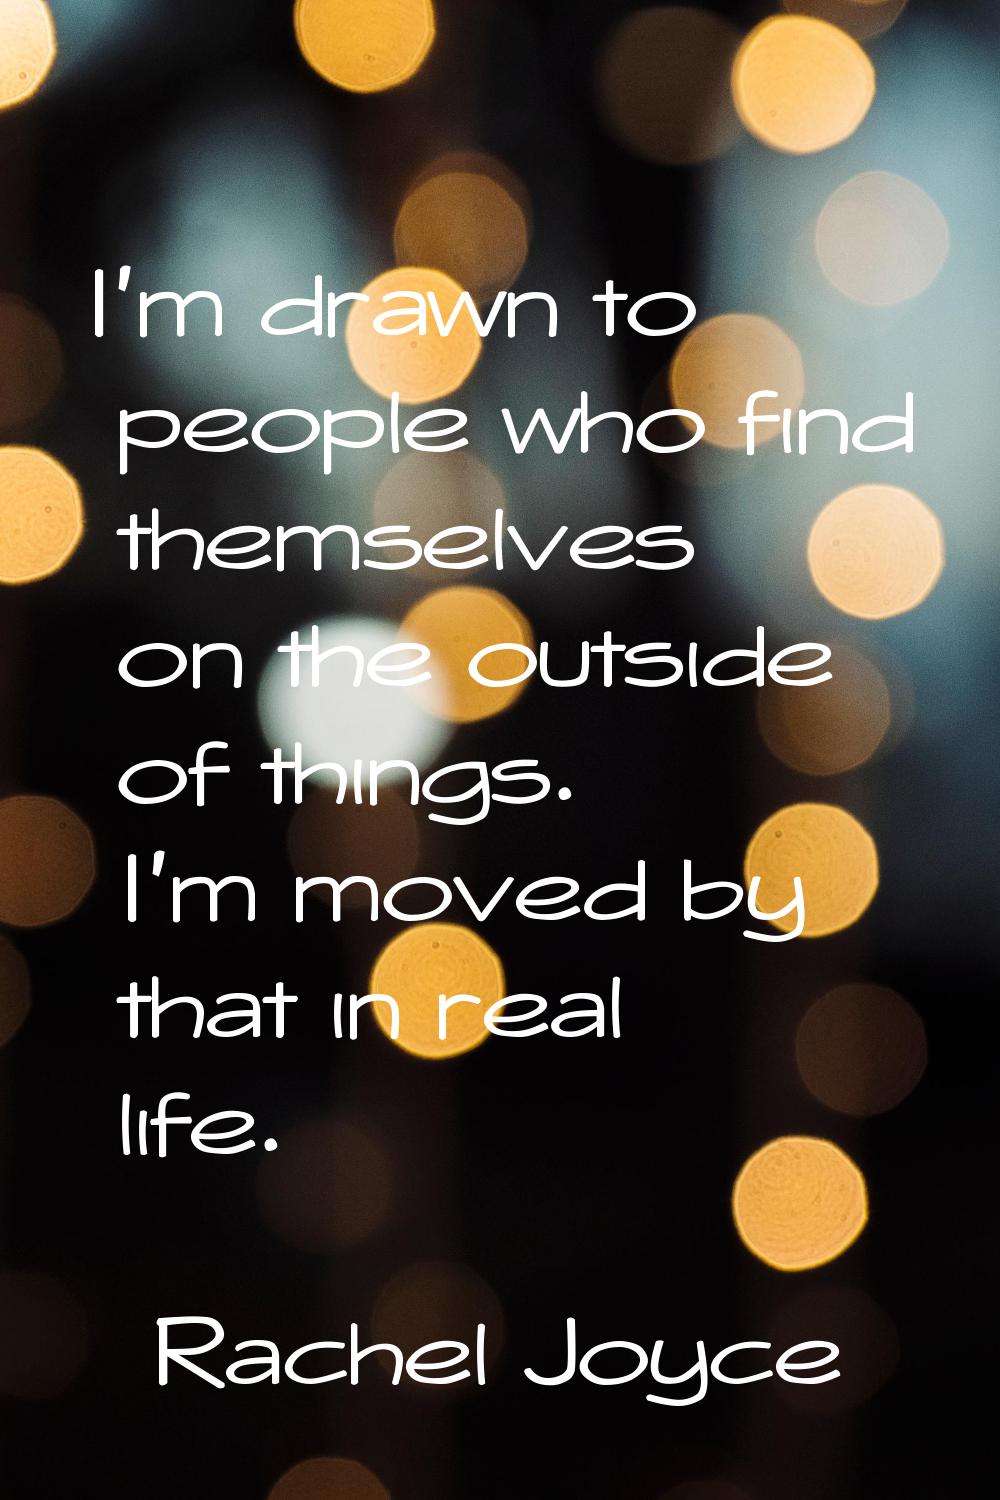 I'm drawn to people who find themselves on the outside of things. I'm moved by that in real life.